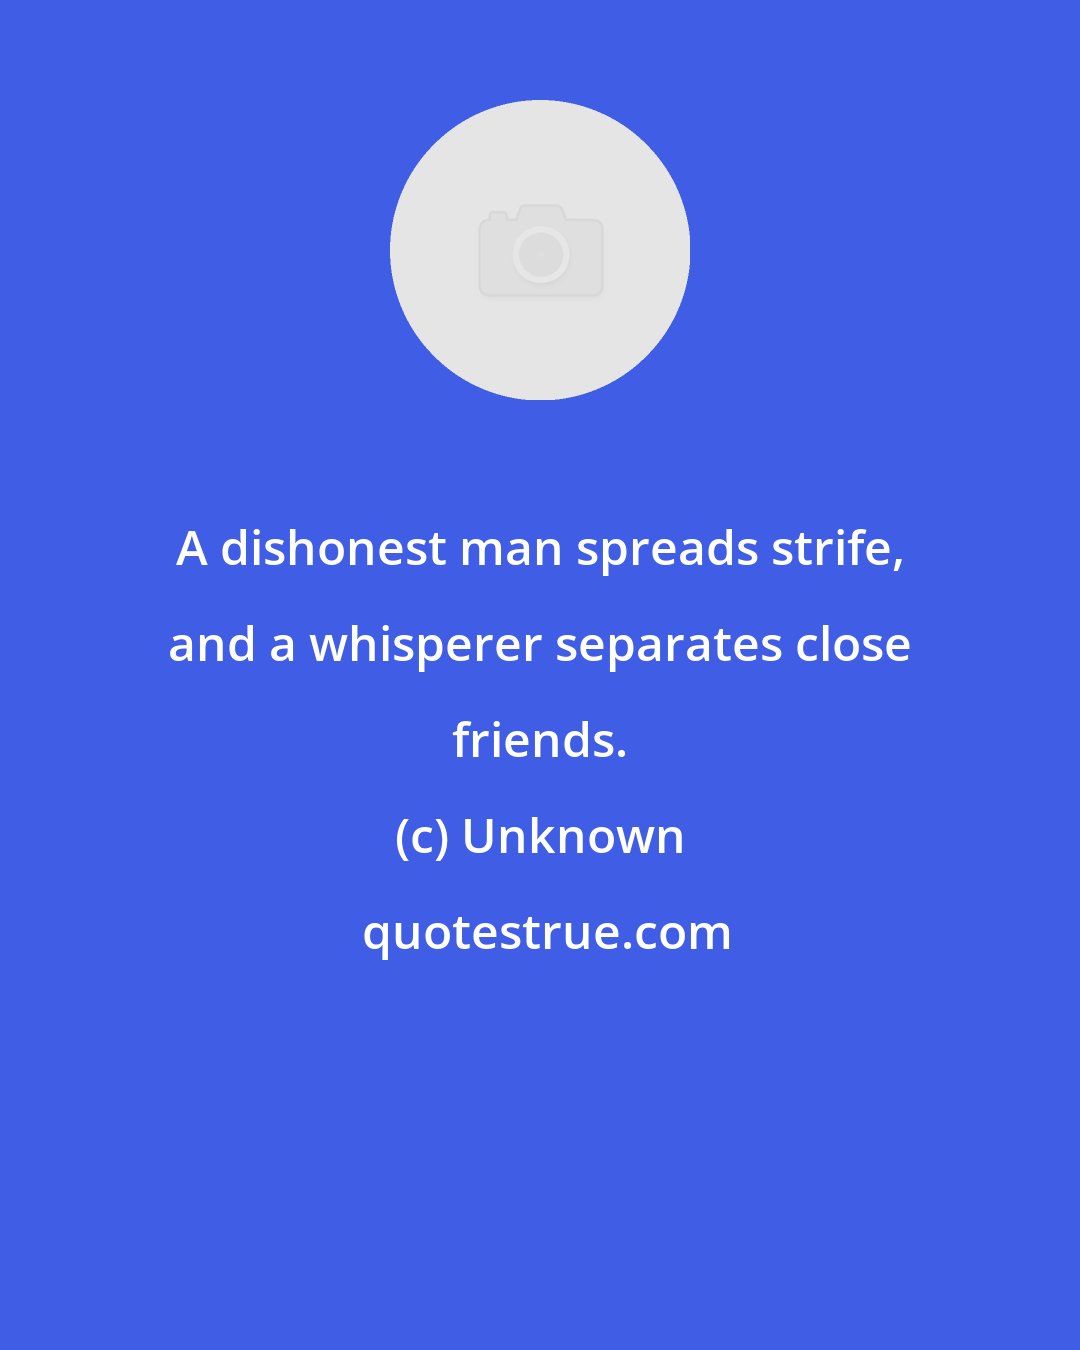 Unknown: A dishonest man spreads strife, and a whisperer separates close friends.